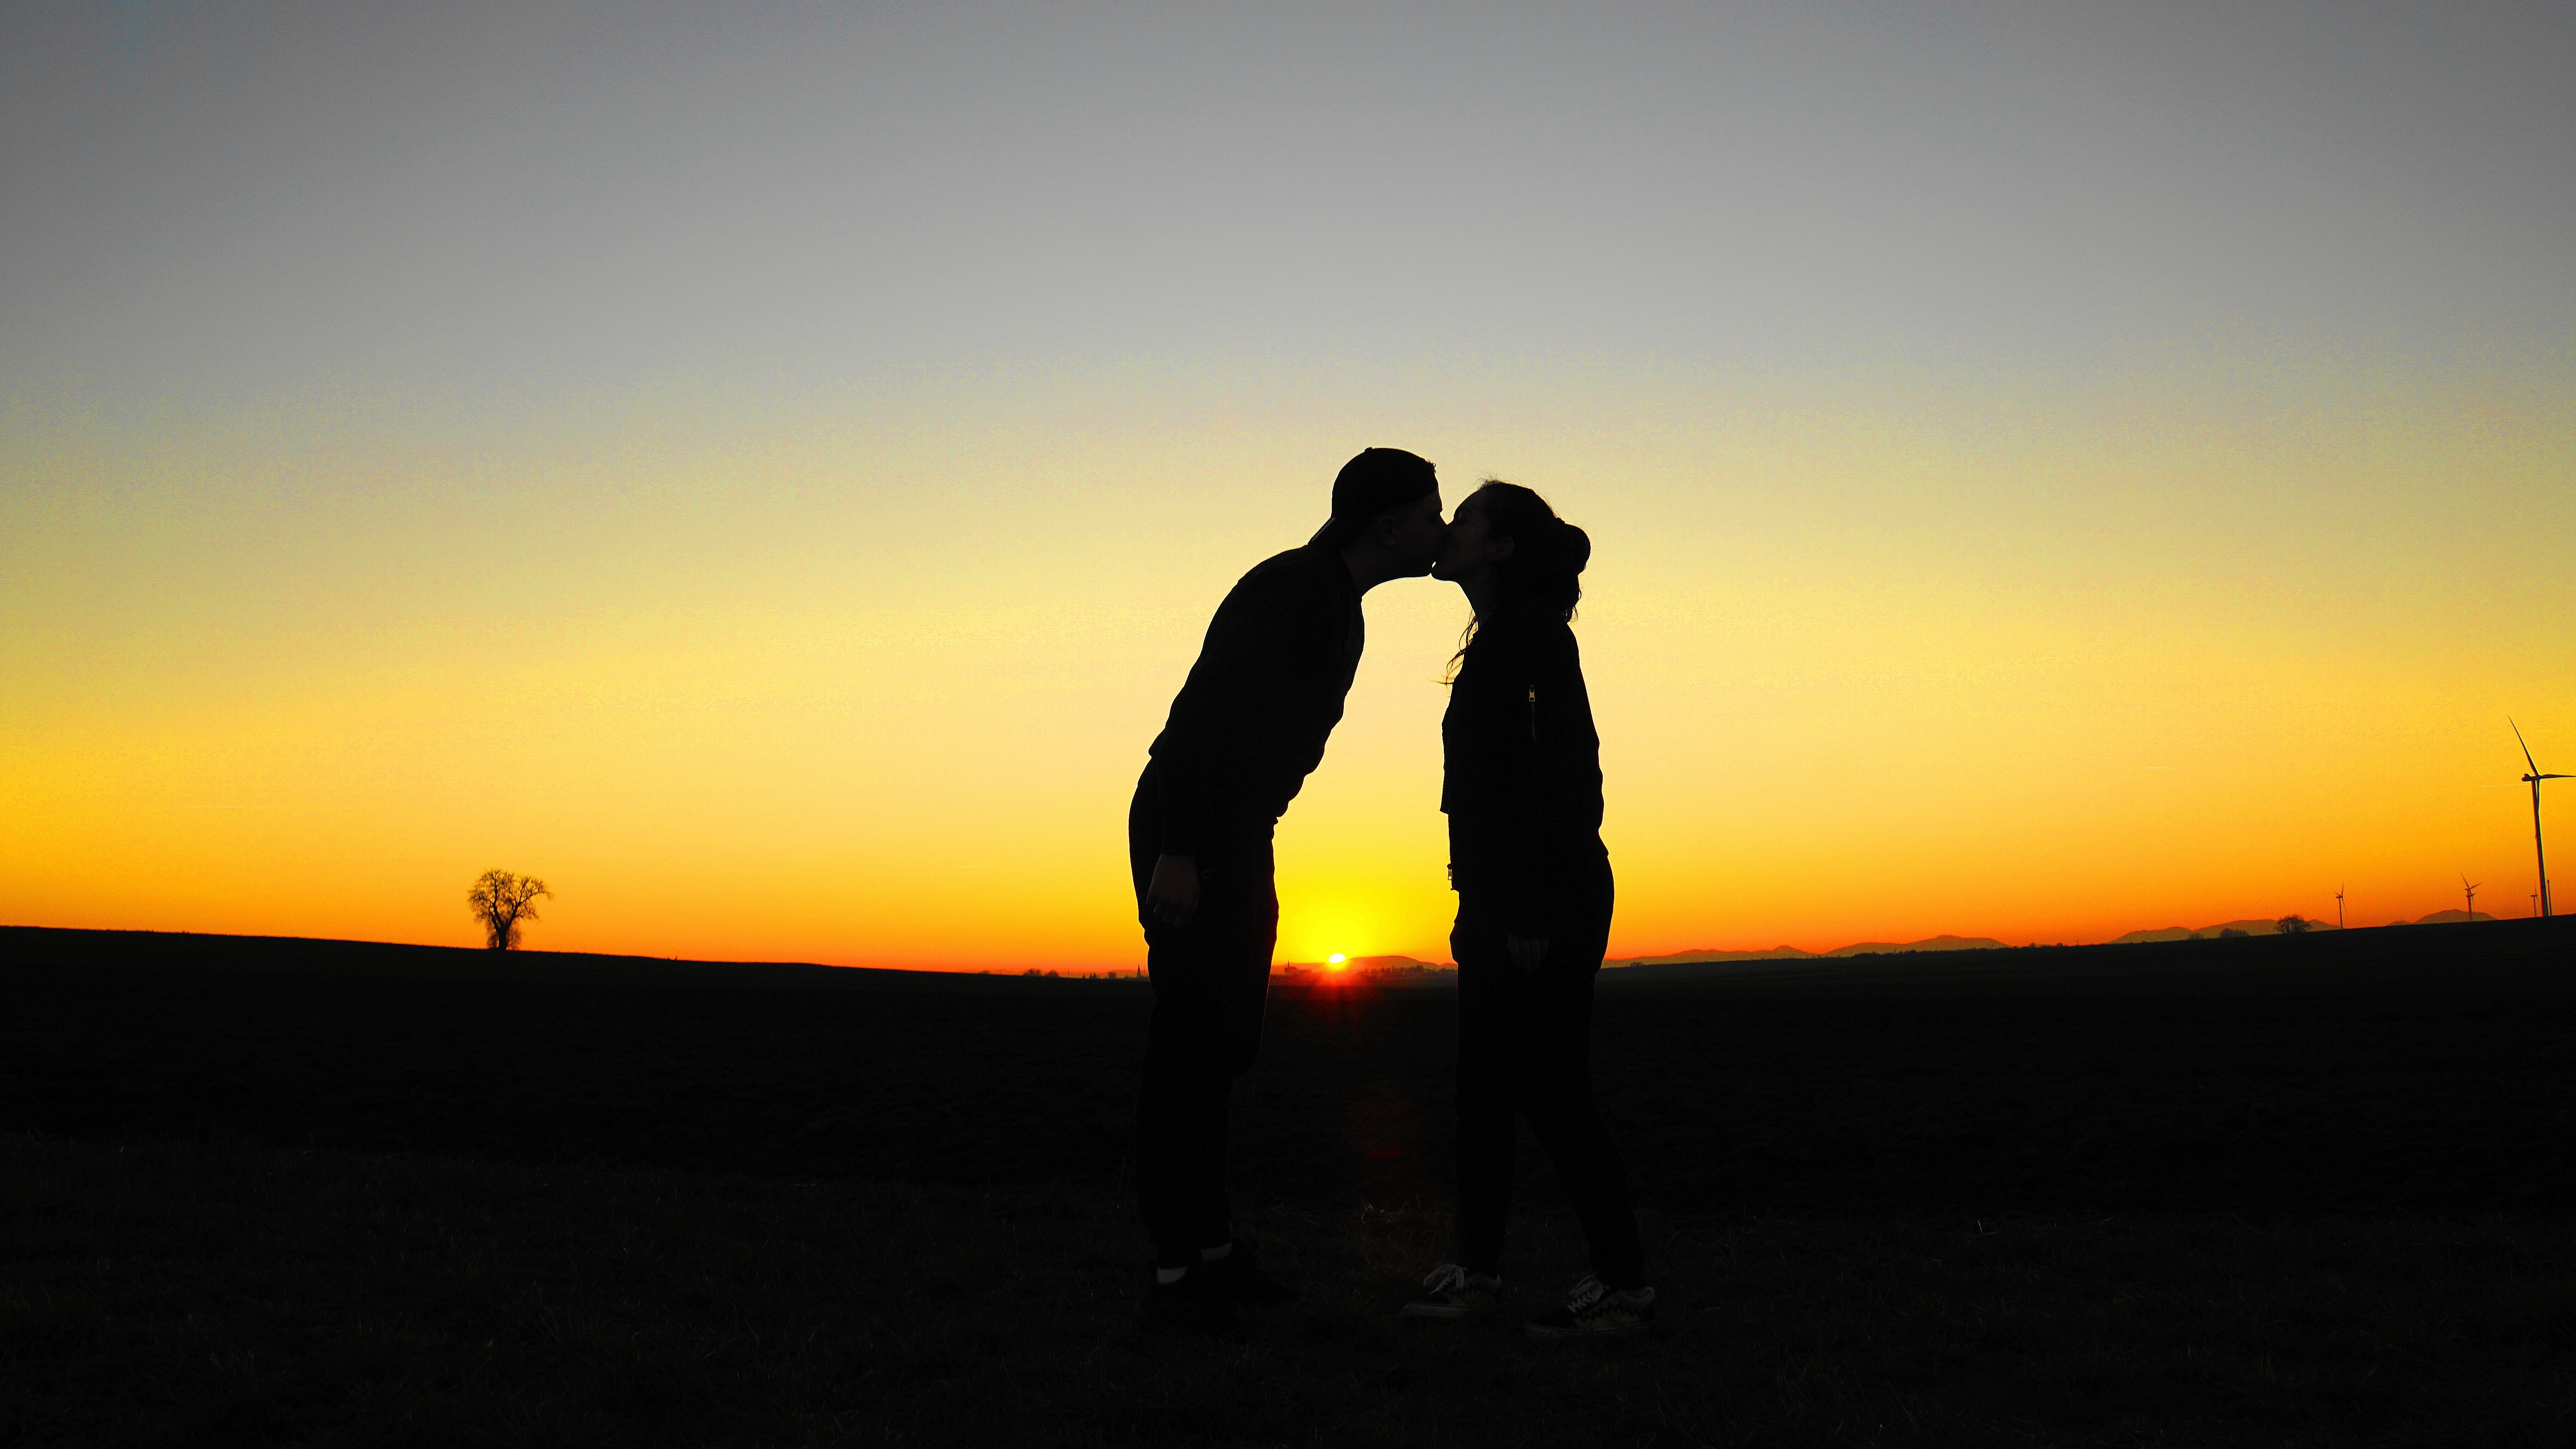 HD wallpaper, Horizon, Evening Sky, Silhouette, Romantic, Kissing Couple, Lovers, 5K, Sunset Orange, Together, Clear Sky